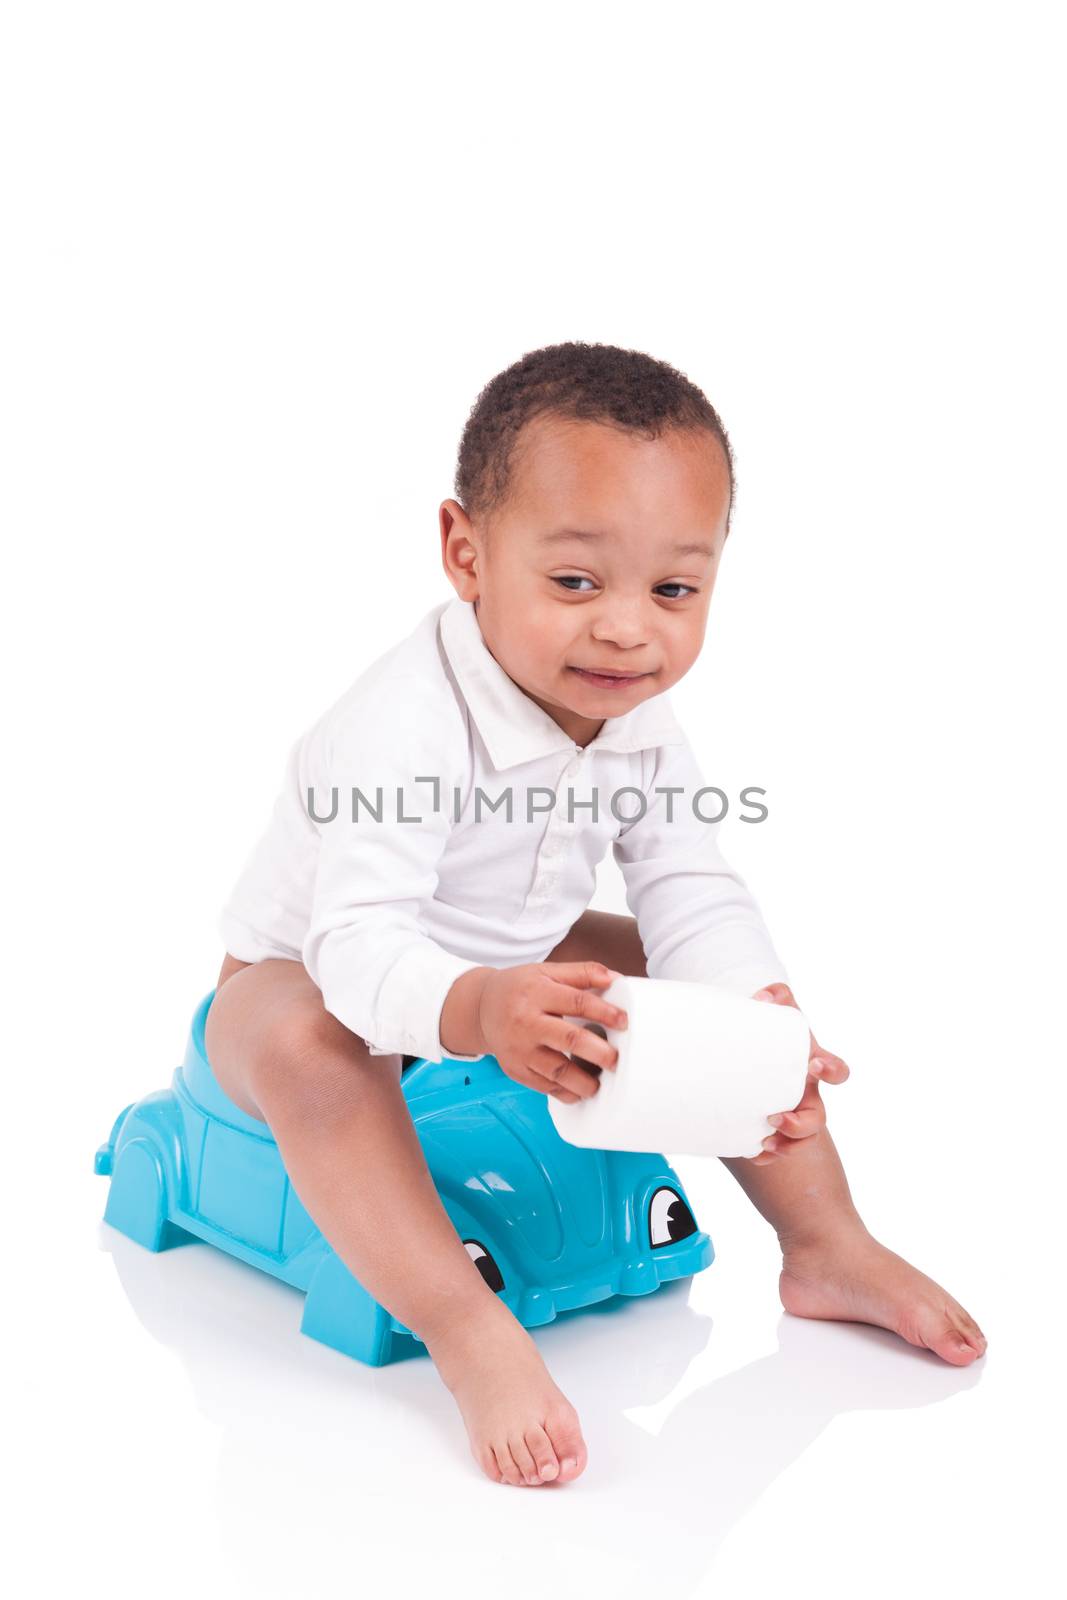 African child on potty play with toilet paper, isolated over whi by michel74100